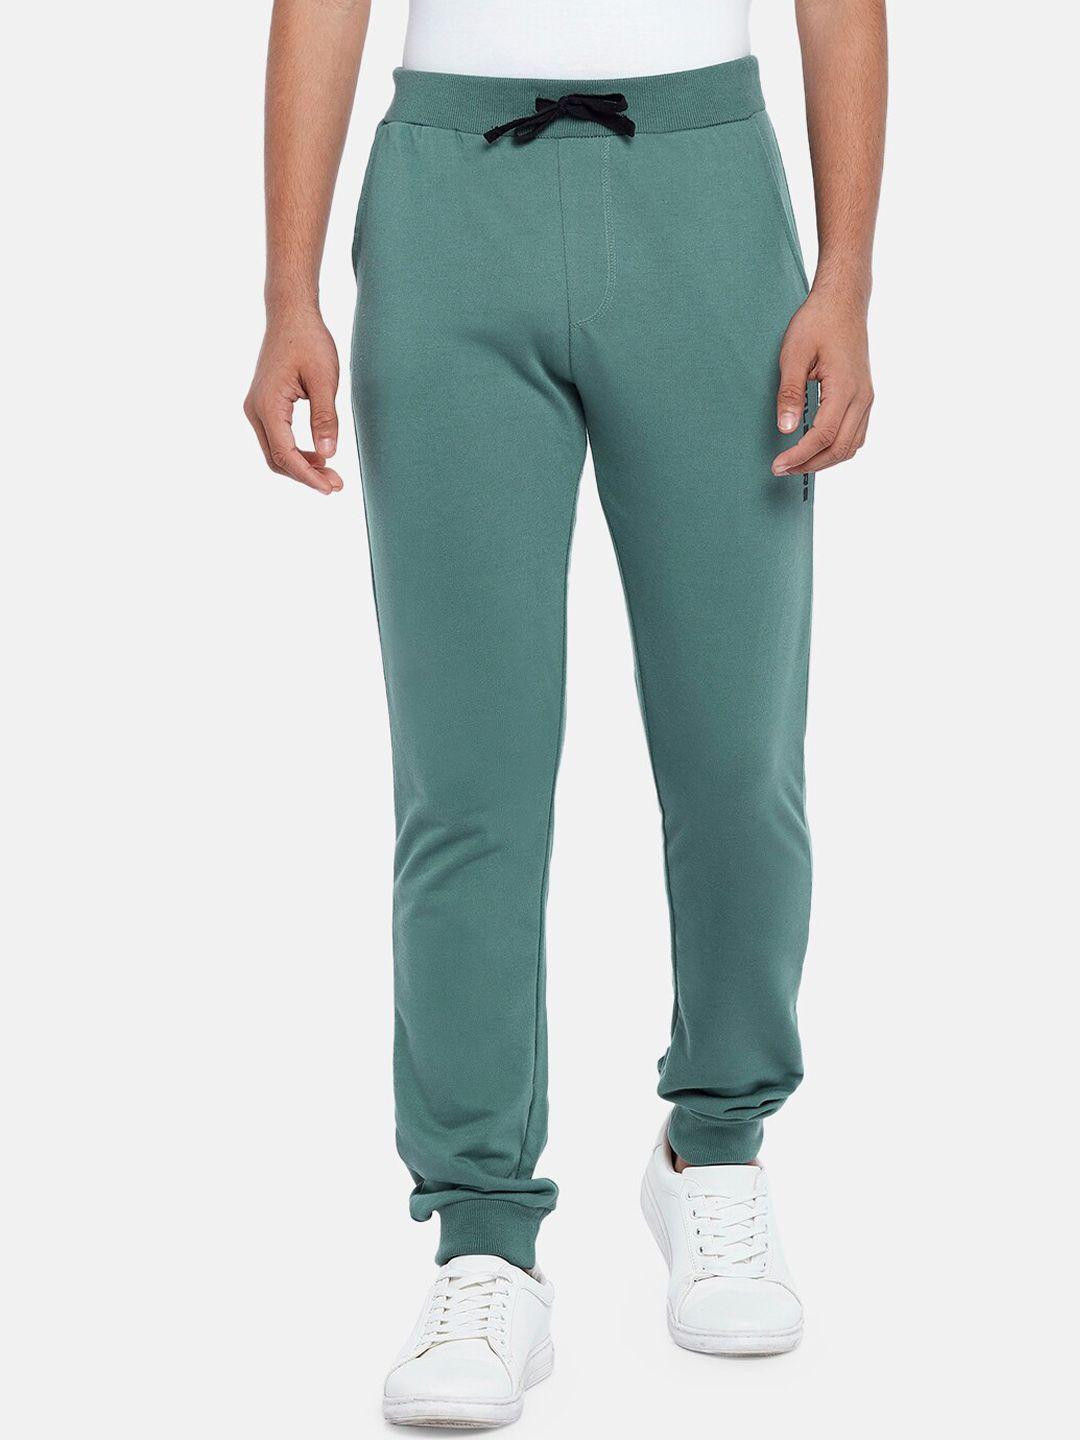 coolsters by pantaloons boys teal solid cotton track pants